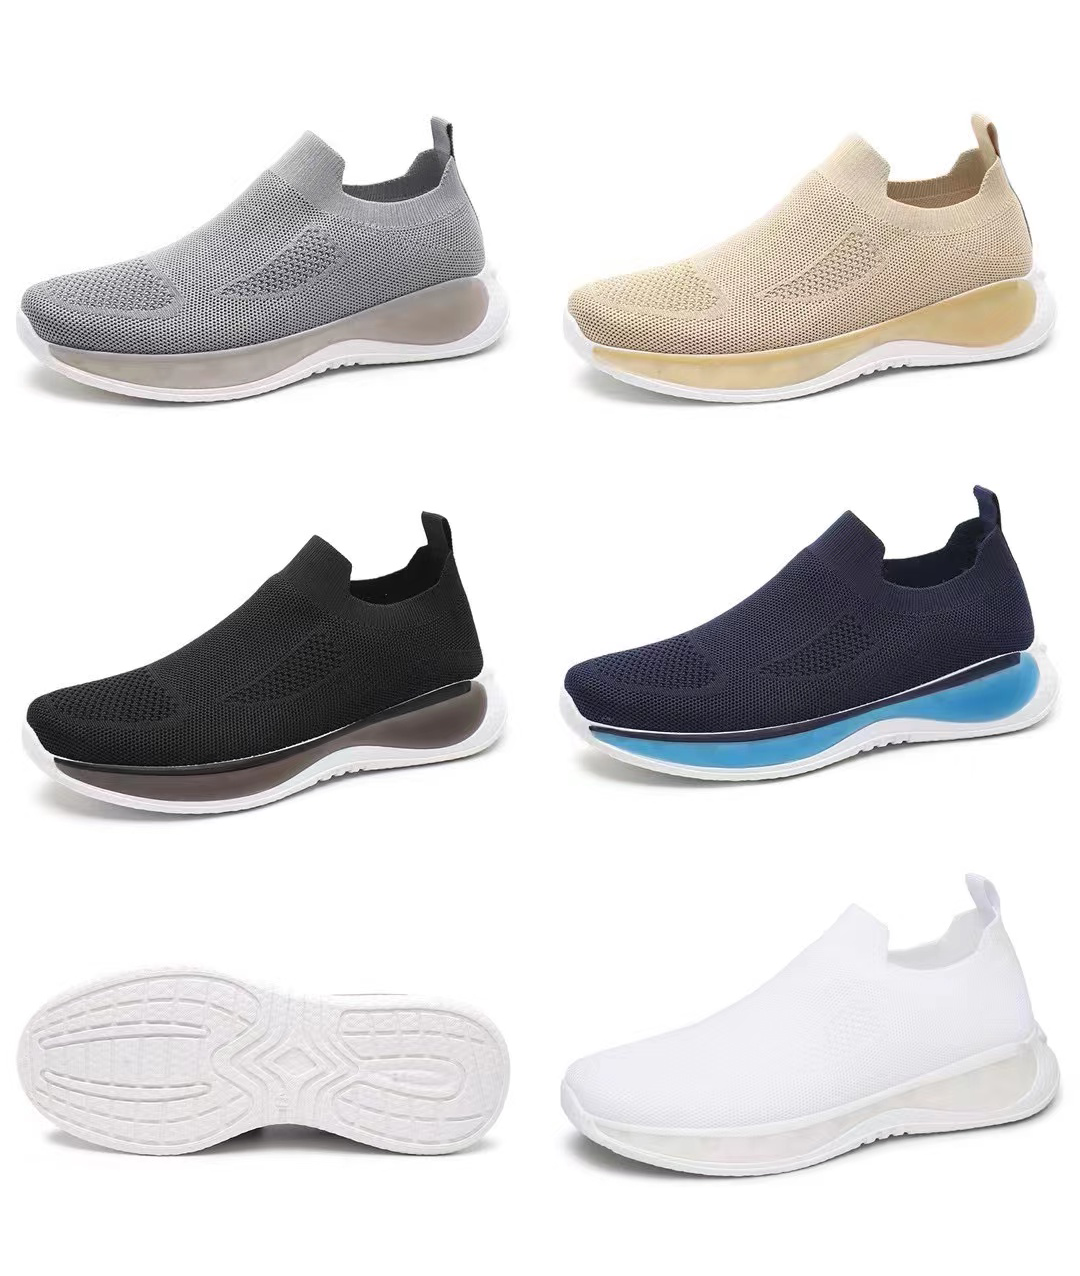 New style fashion sport shoes for men 1. ITEM NO: Z26-2207-4...